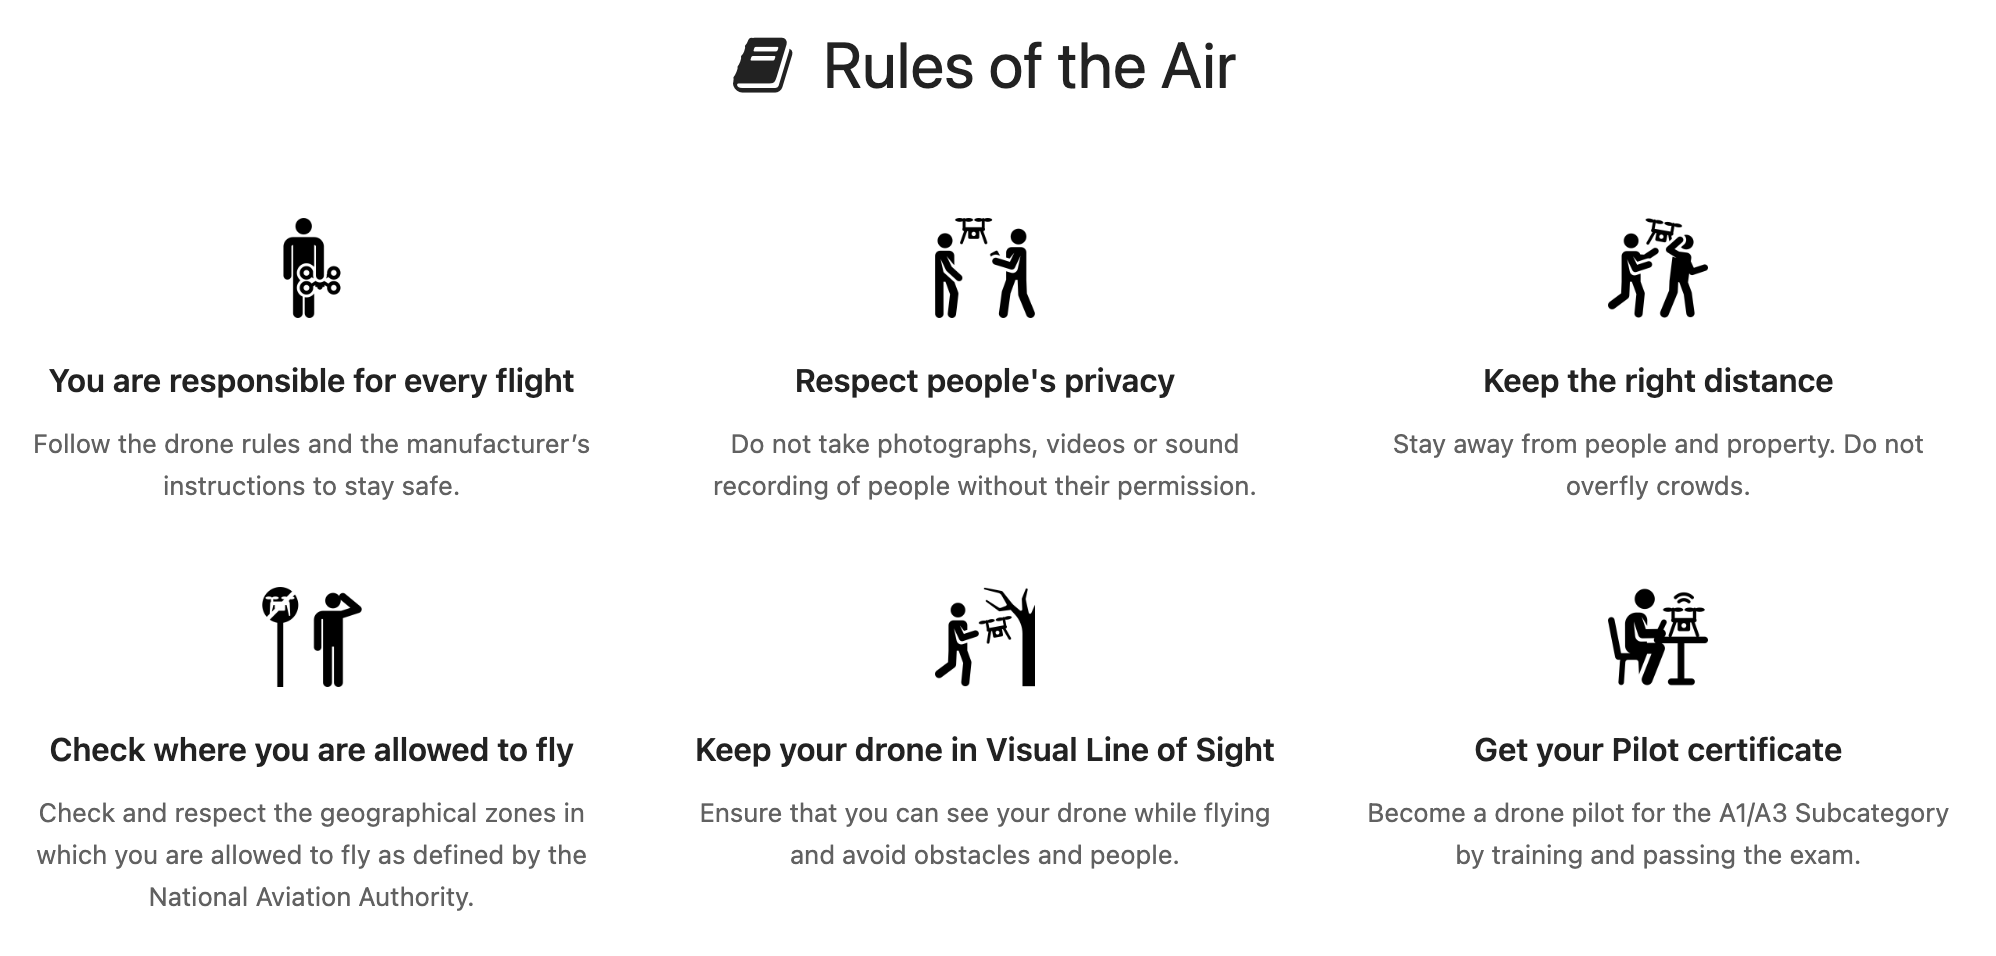 Rules of the Air